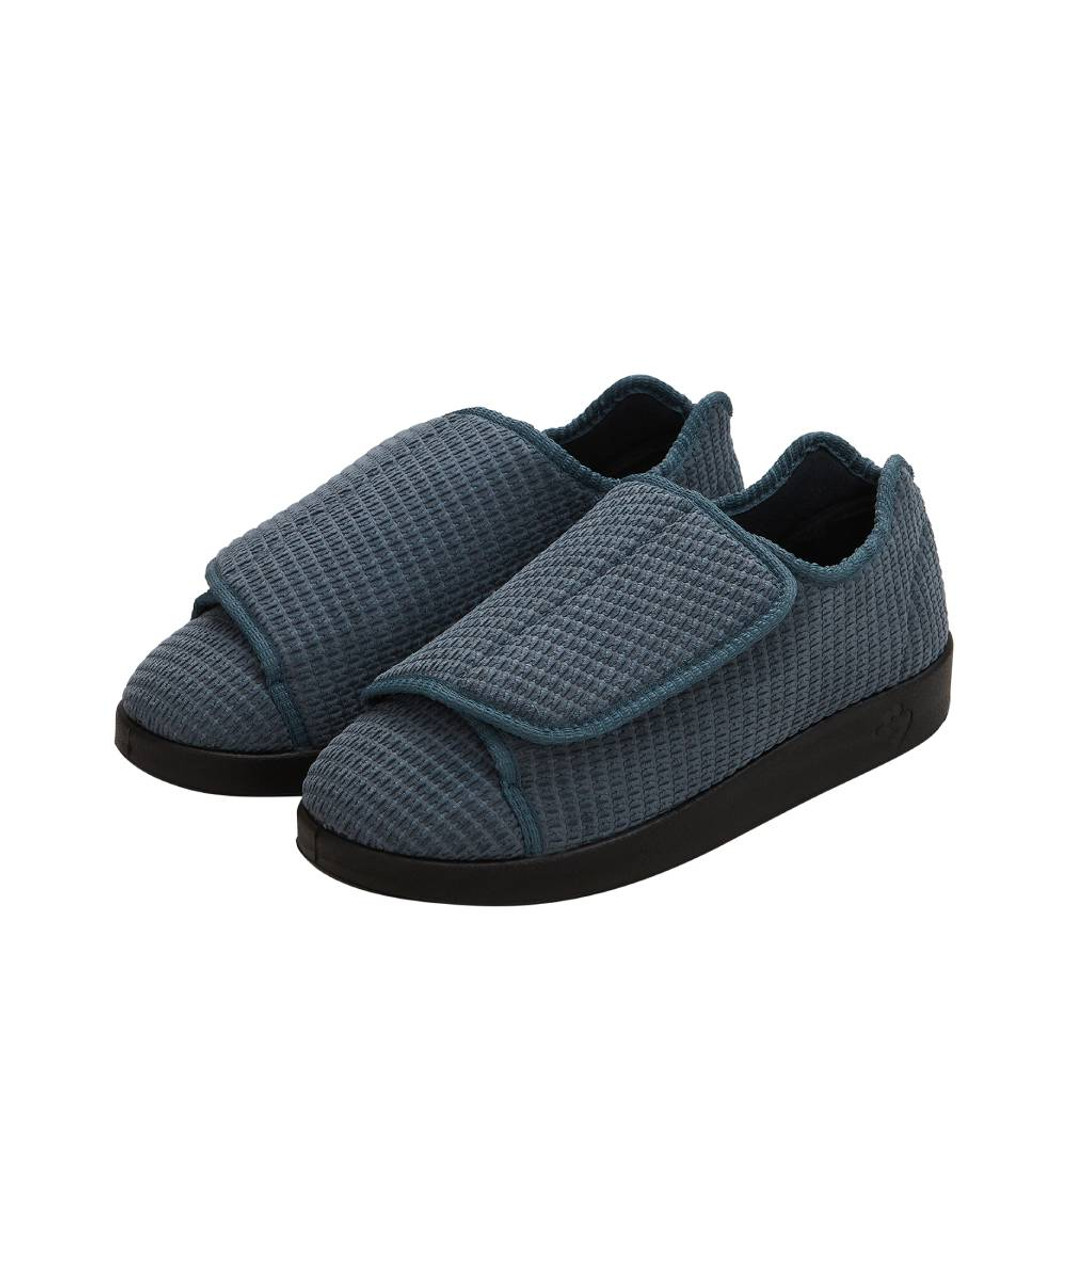 Silverts SV55105 Mens Extra Extra Wide Slip Resistant Slippers Steel, Size=11, SV55105-SVSTB-11